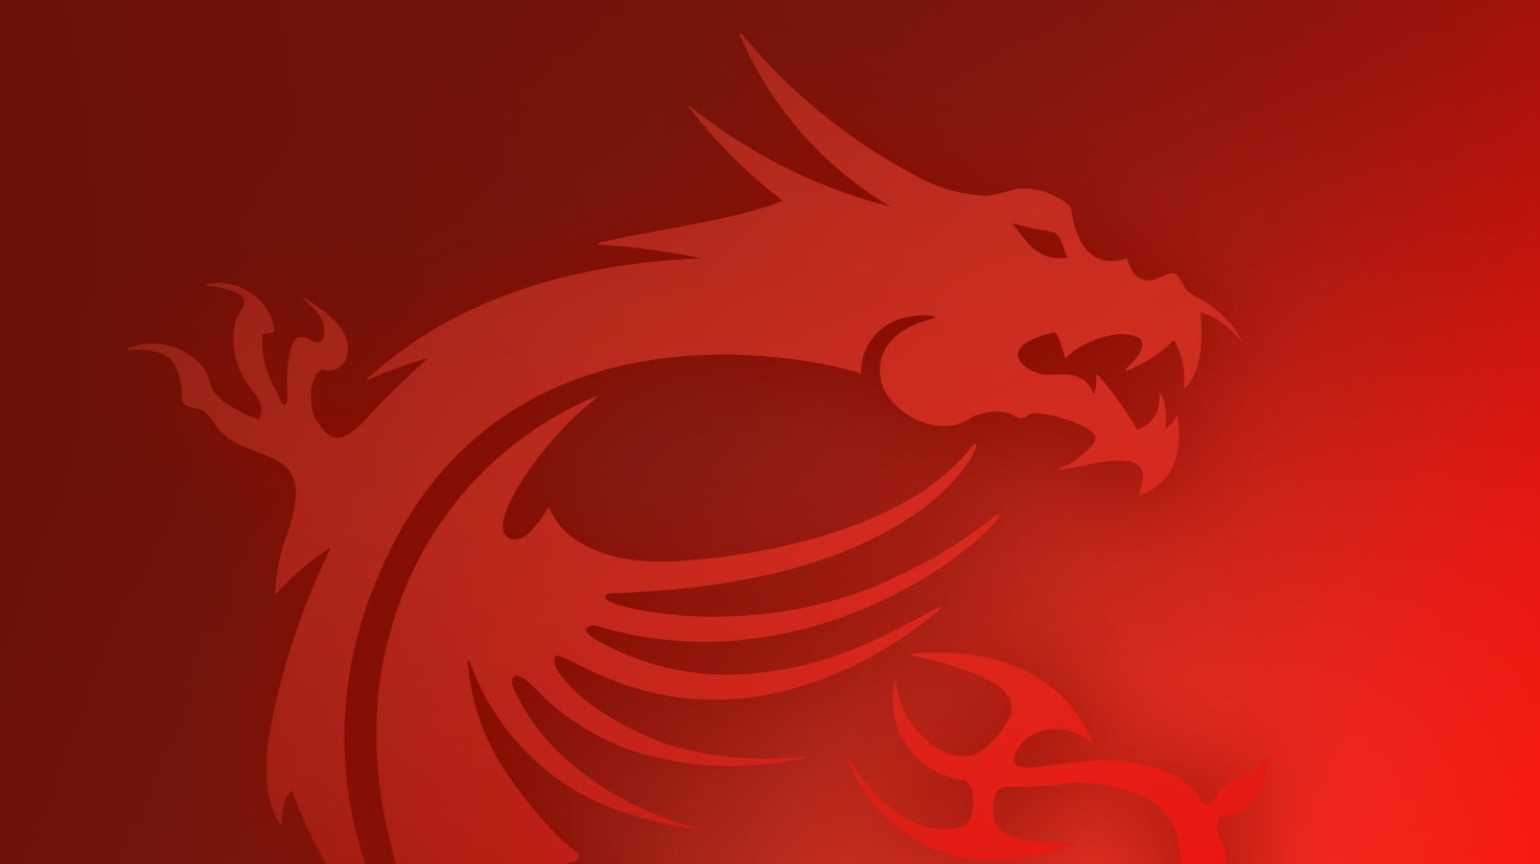 Red Dragon over red gradient background